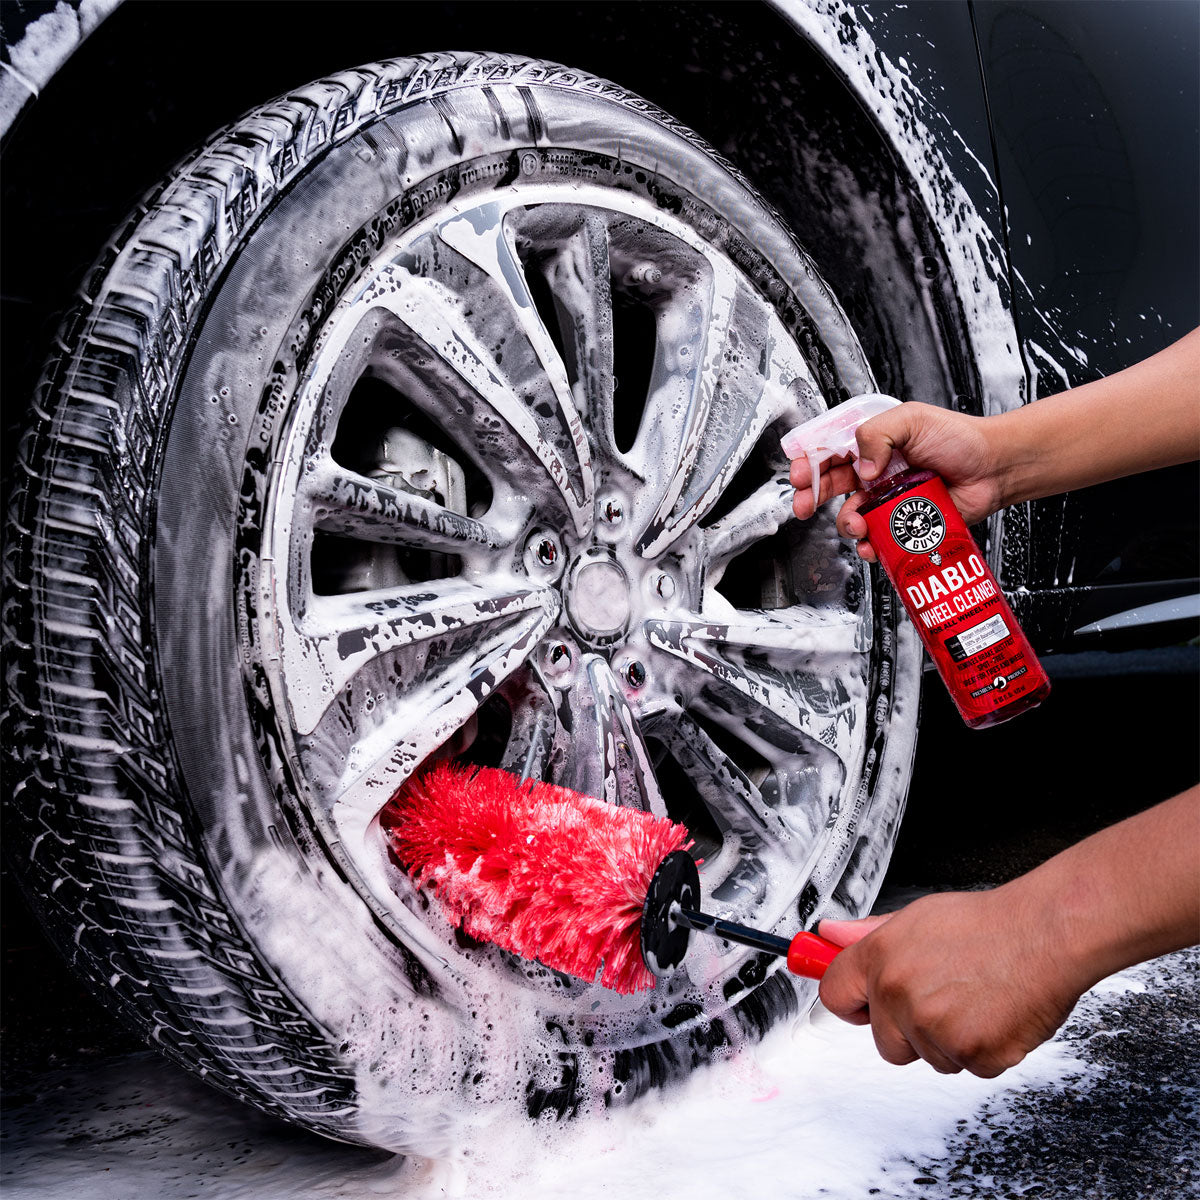 Chemical Guys Diablo Gel Wheel & Rim Cleaner Concentrated: Tough on dirt, pH-neutral on alloys & rims! - Spray on to & work in